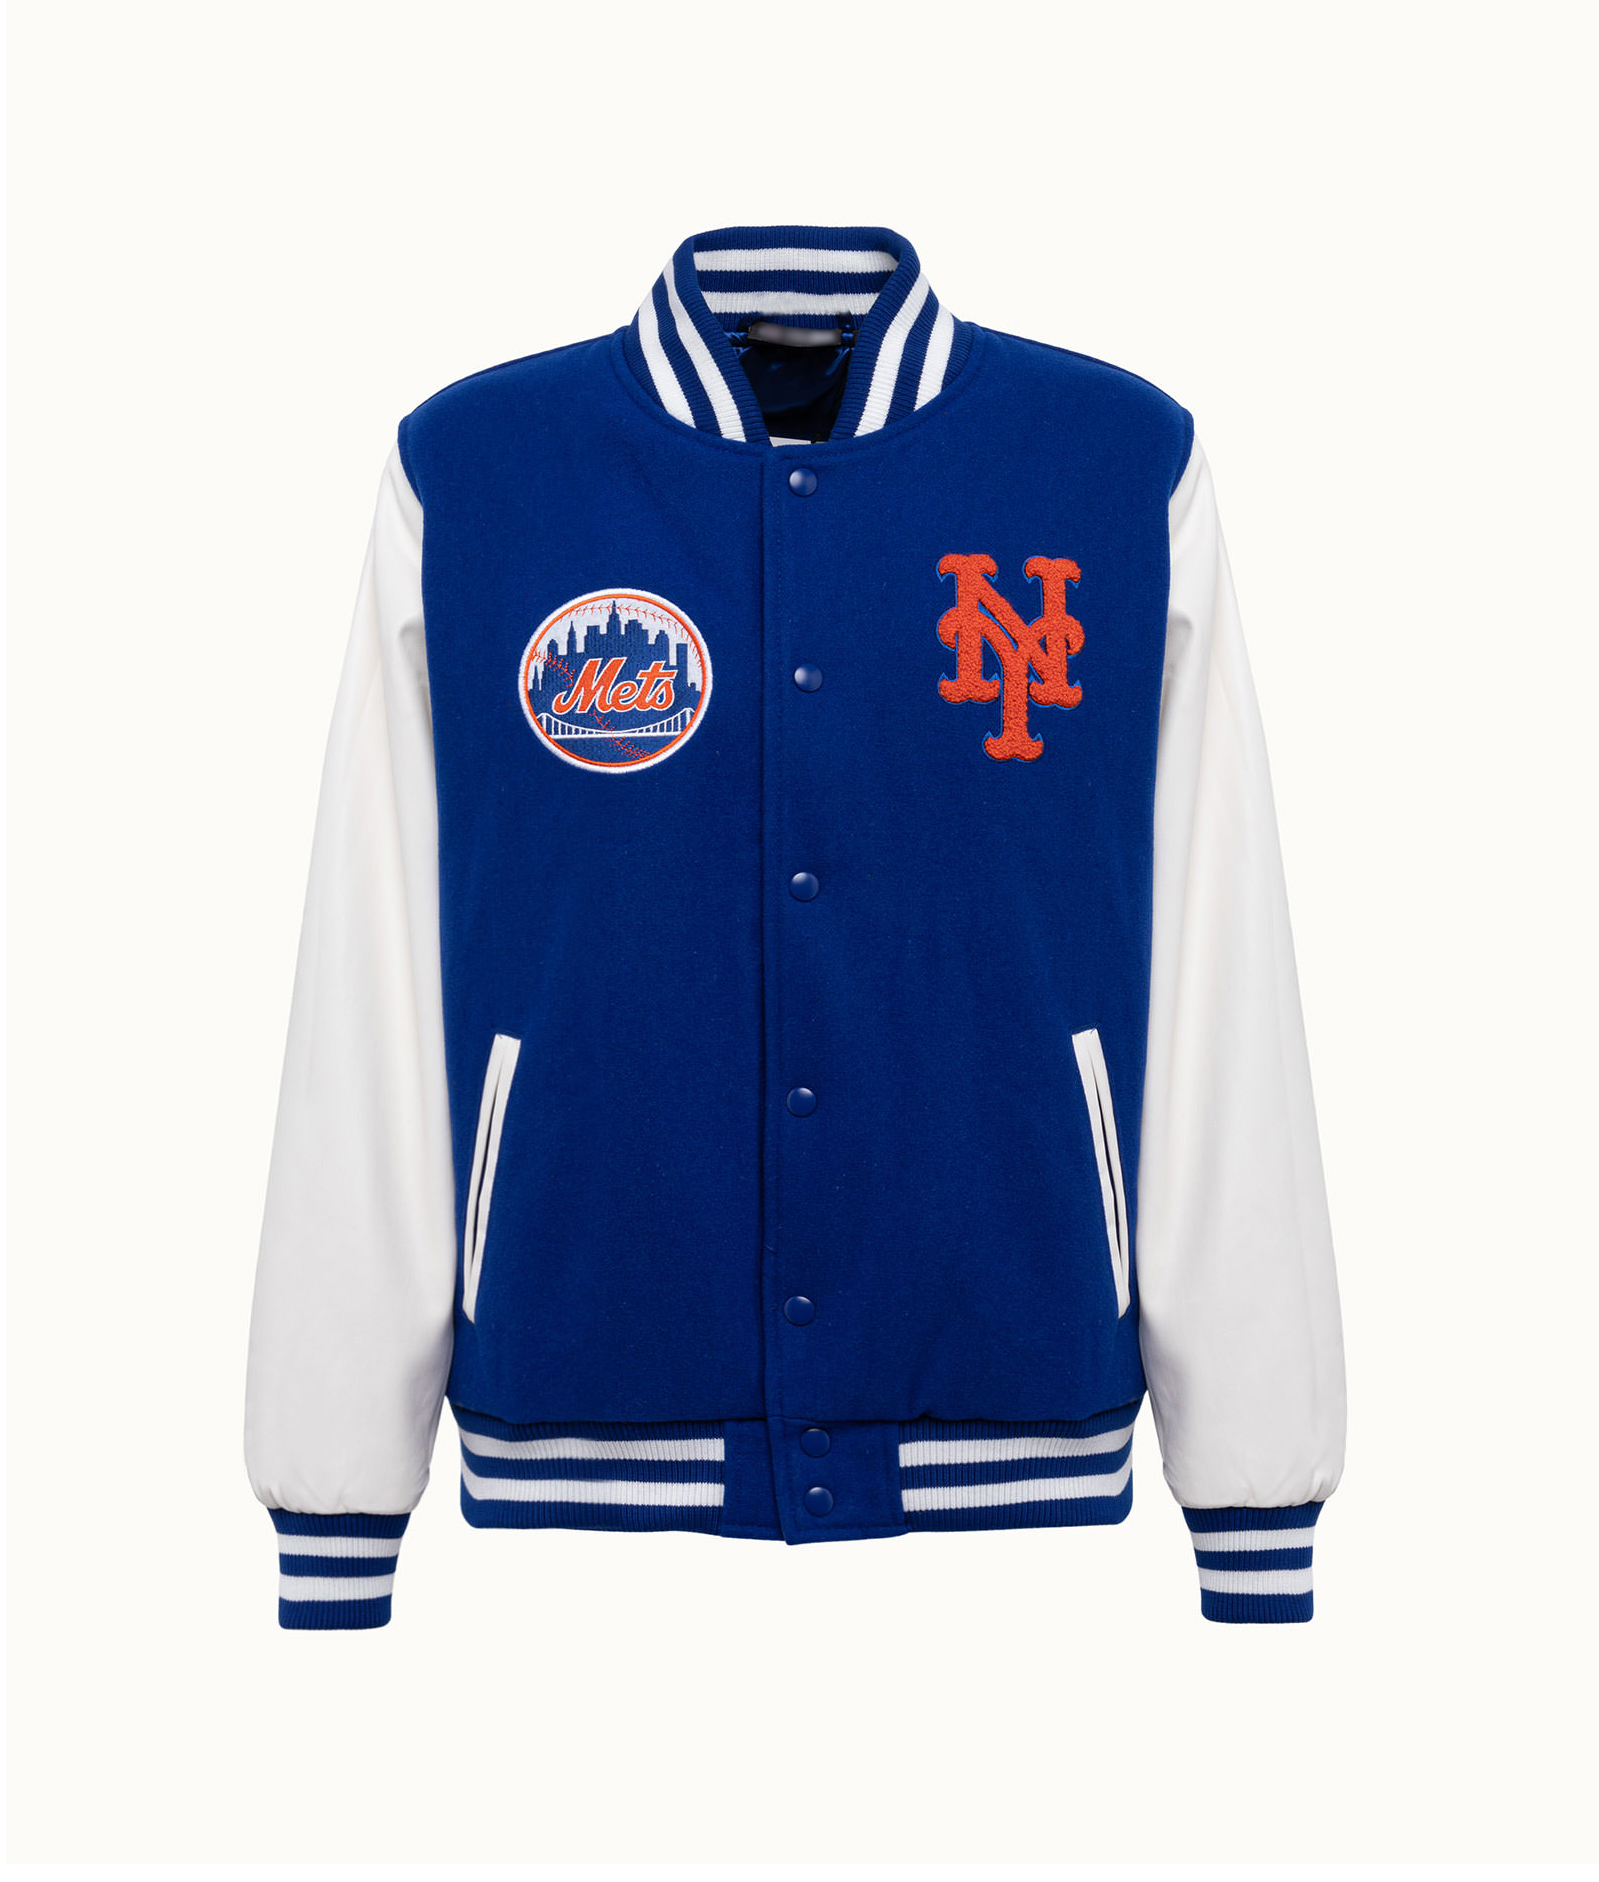 Blue and White Mets Varsity Jacket (4)